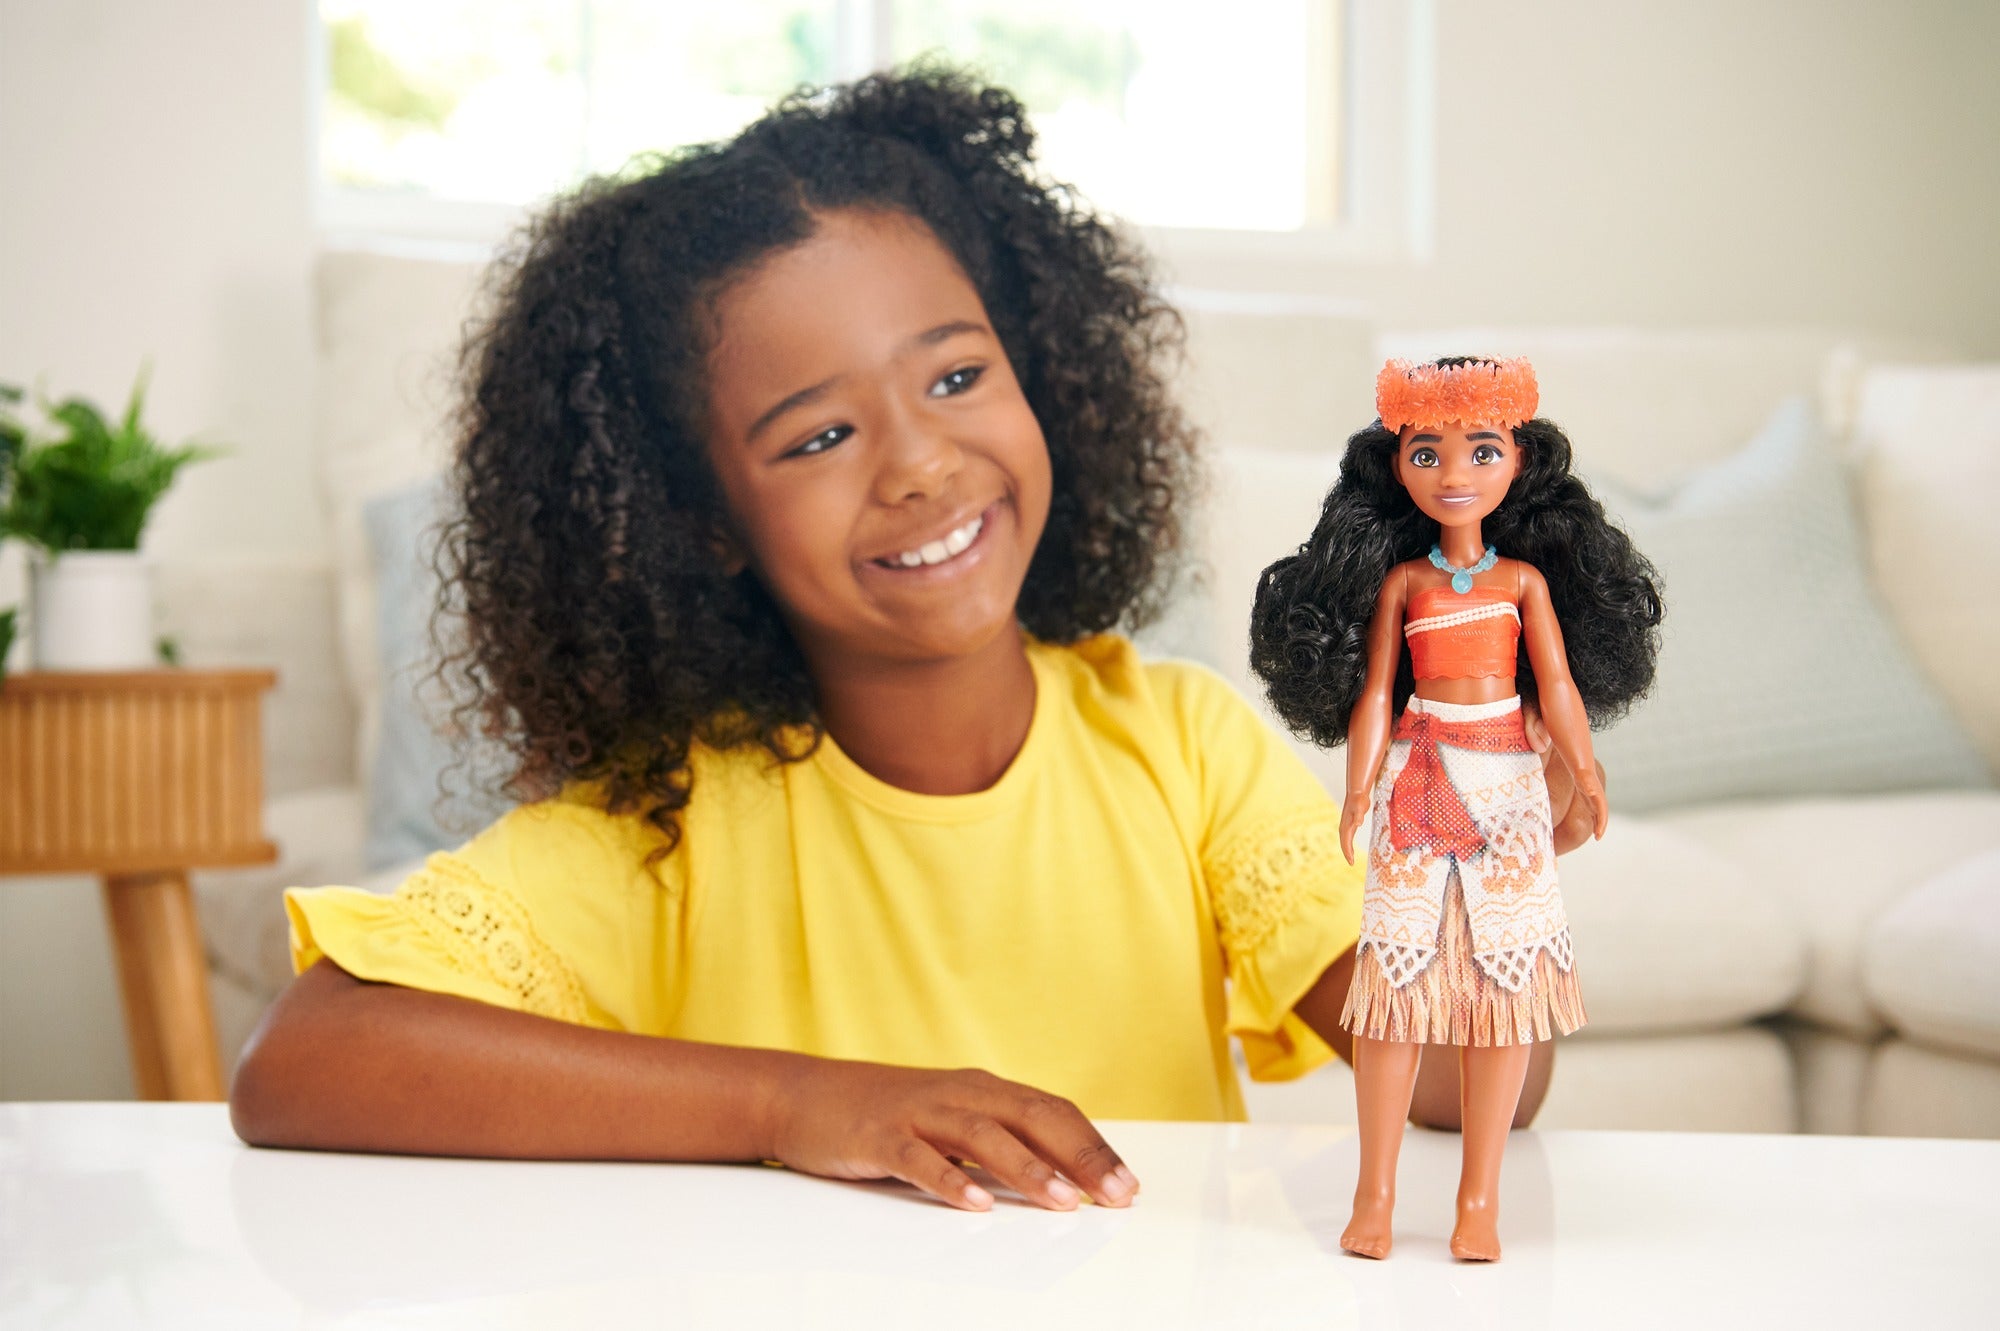 Disney Princess Moana Posable Fashion Doll with Sparkling Clothing and Accessories for Kids Ages 3+